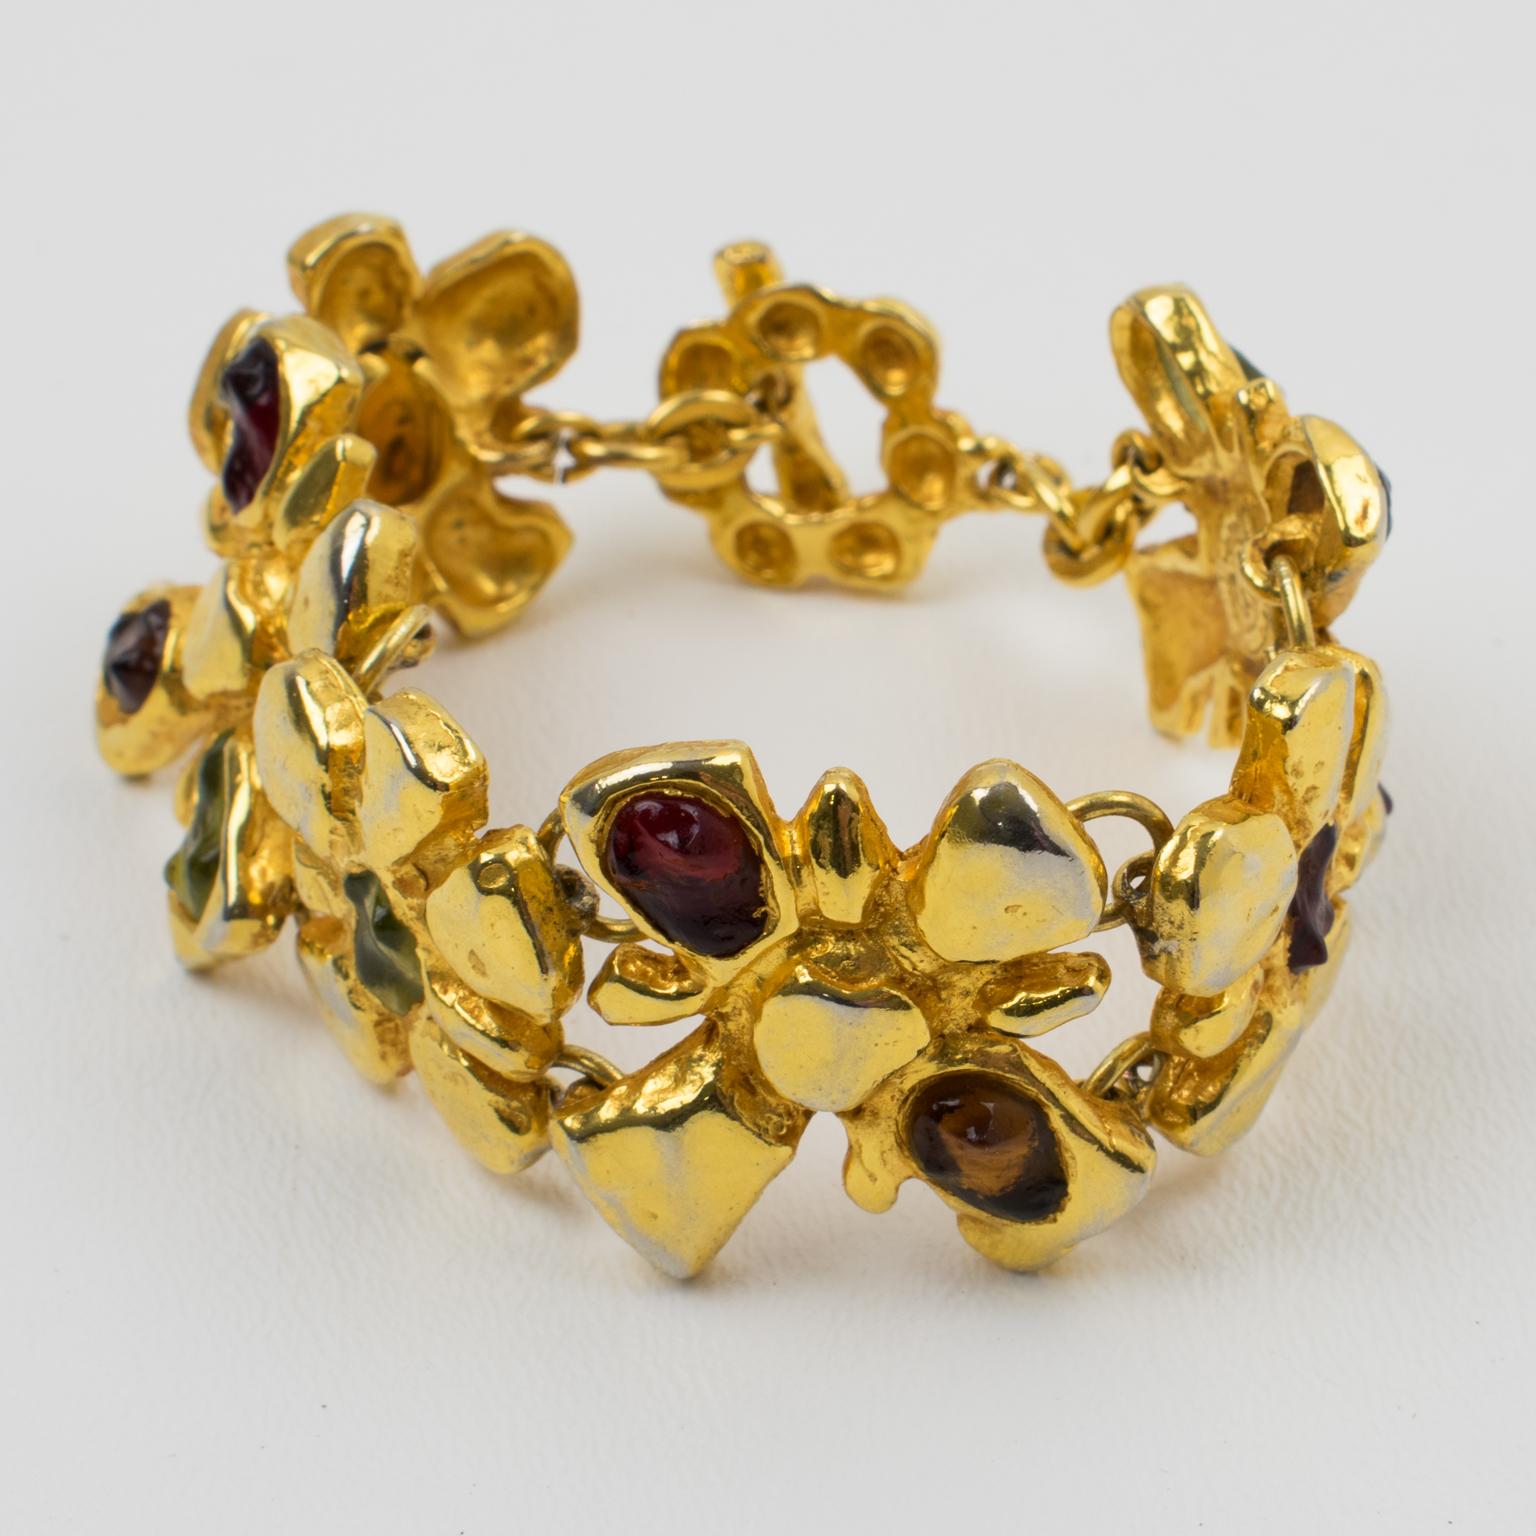 This stunning Christian Lacroix Paris link bracelet features rich ornamental detailing and a stylized floral design. The gilt metal carved and see-thru framing is ornate with Gripoix poured glass rock cabochons in burgundy-red and green pistachio